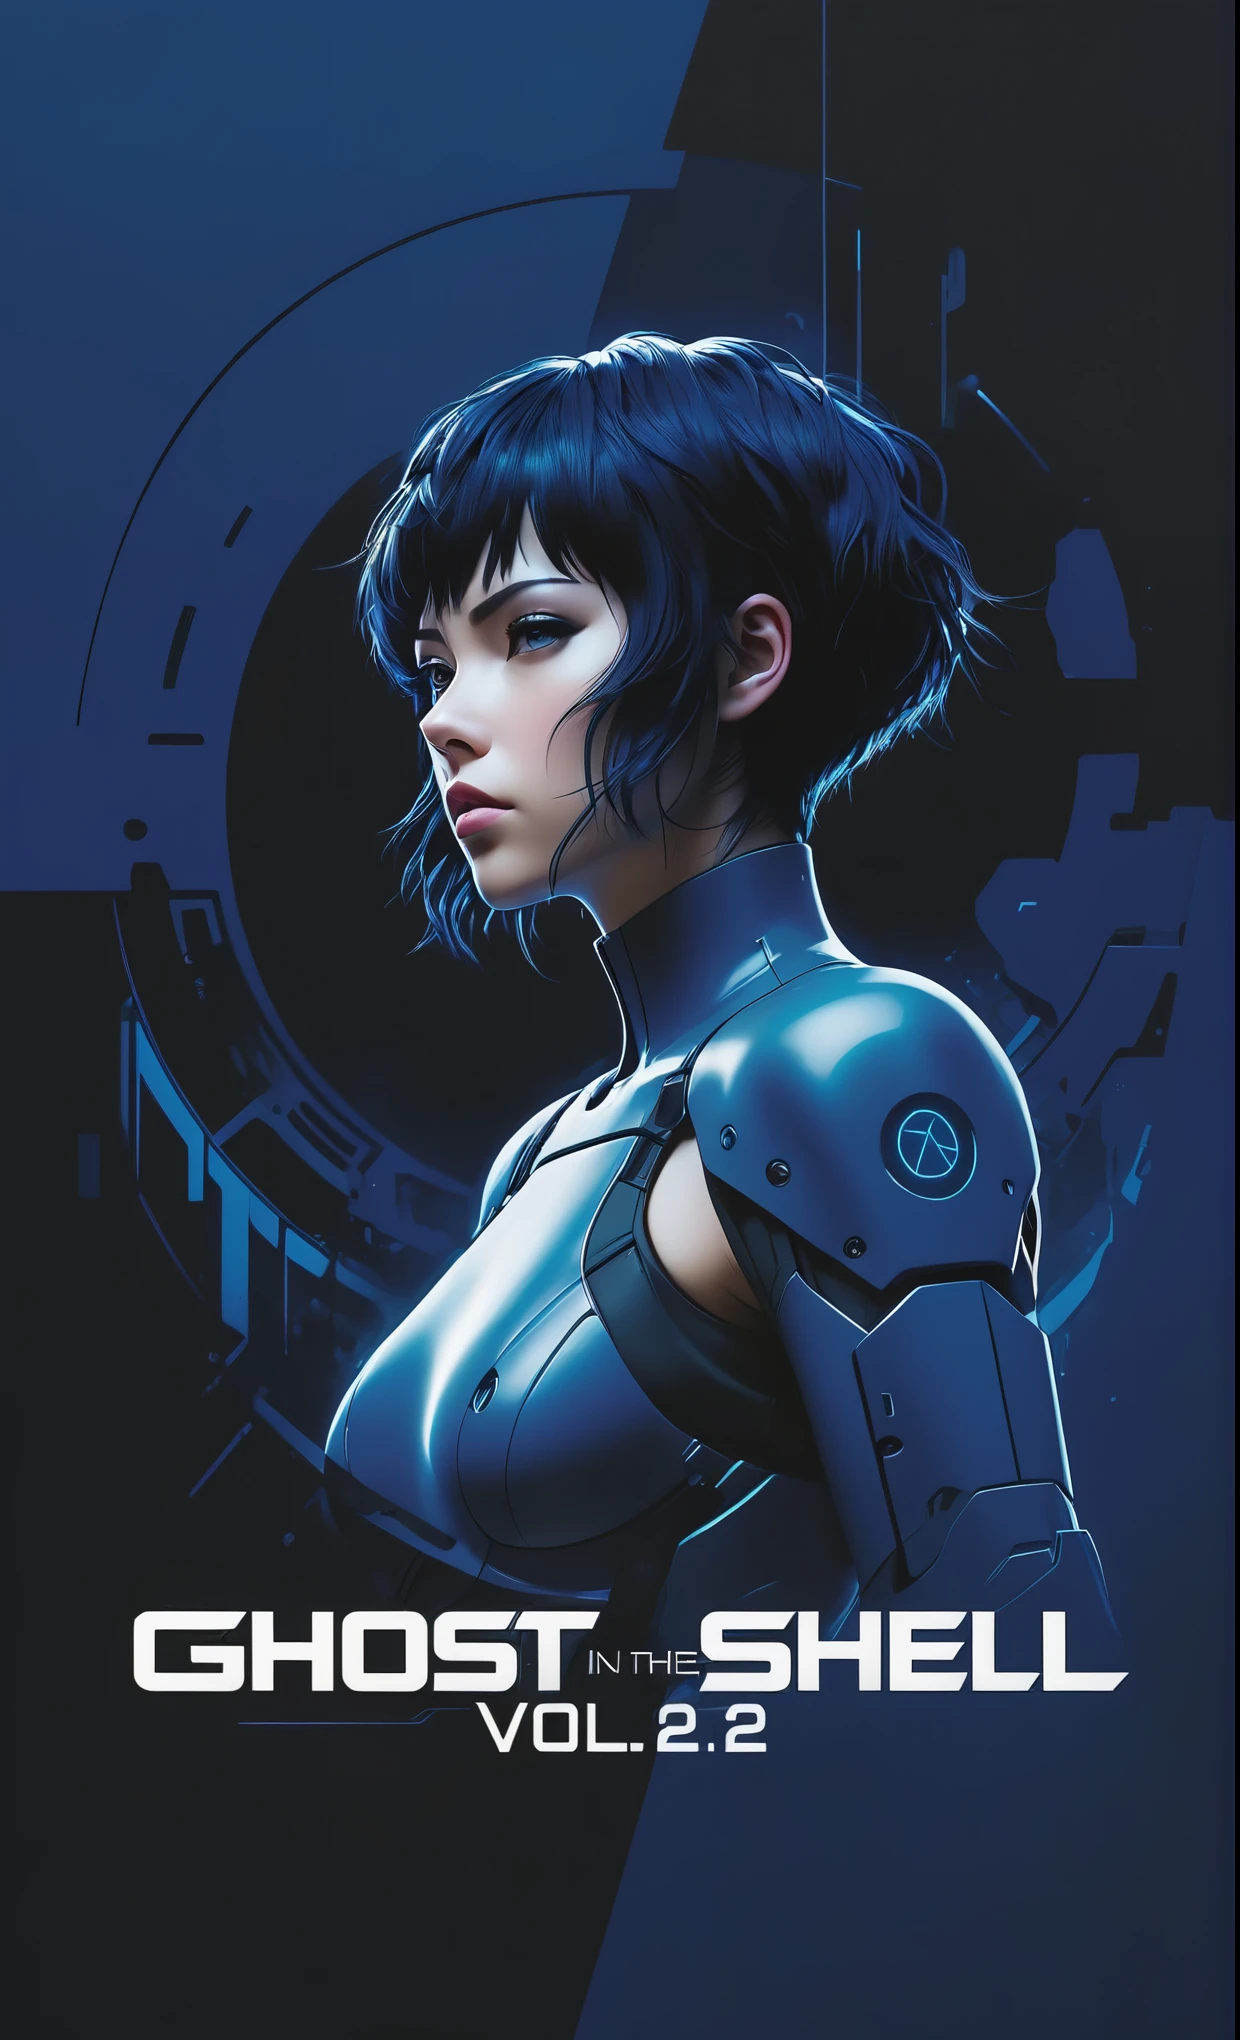 Ghost in the Shell Vol.2 - The end, by Luis Duarte, Luis Duarte style, blue and black shading, Neo-Tokyo style, Element Air, Mythpunk, Graphic Interface, Sci-Fic Art, Dark Influence, NijiExpress 3D v3, Kinetic Art, Datanoshing, Oilpainting, Ink v3, Splash style, Abstract Art, Abstract Tech, Cyber Tech Elements, Futuristic, Illustrated v3, Deco Influence, AirBrush style, drawing